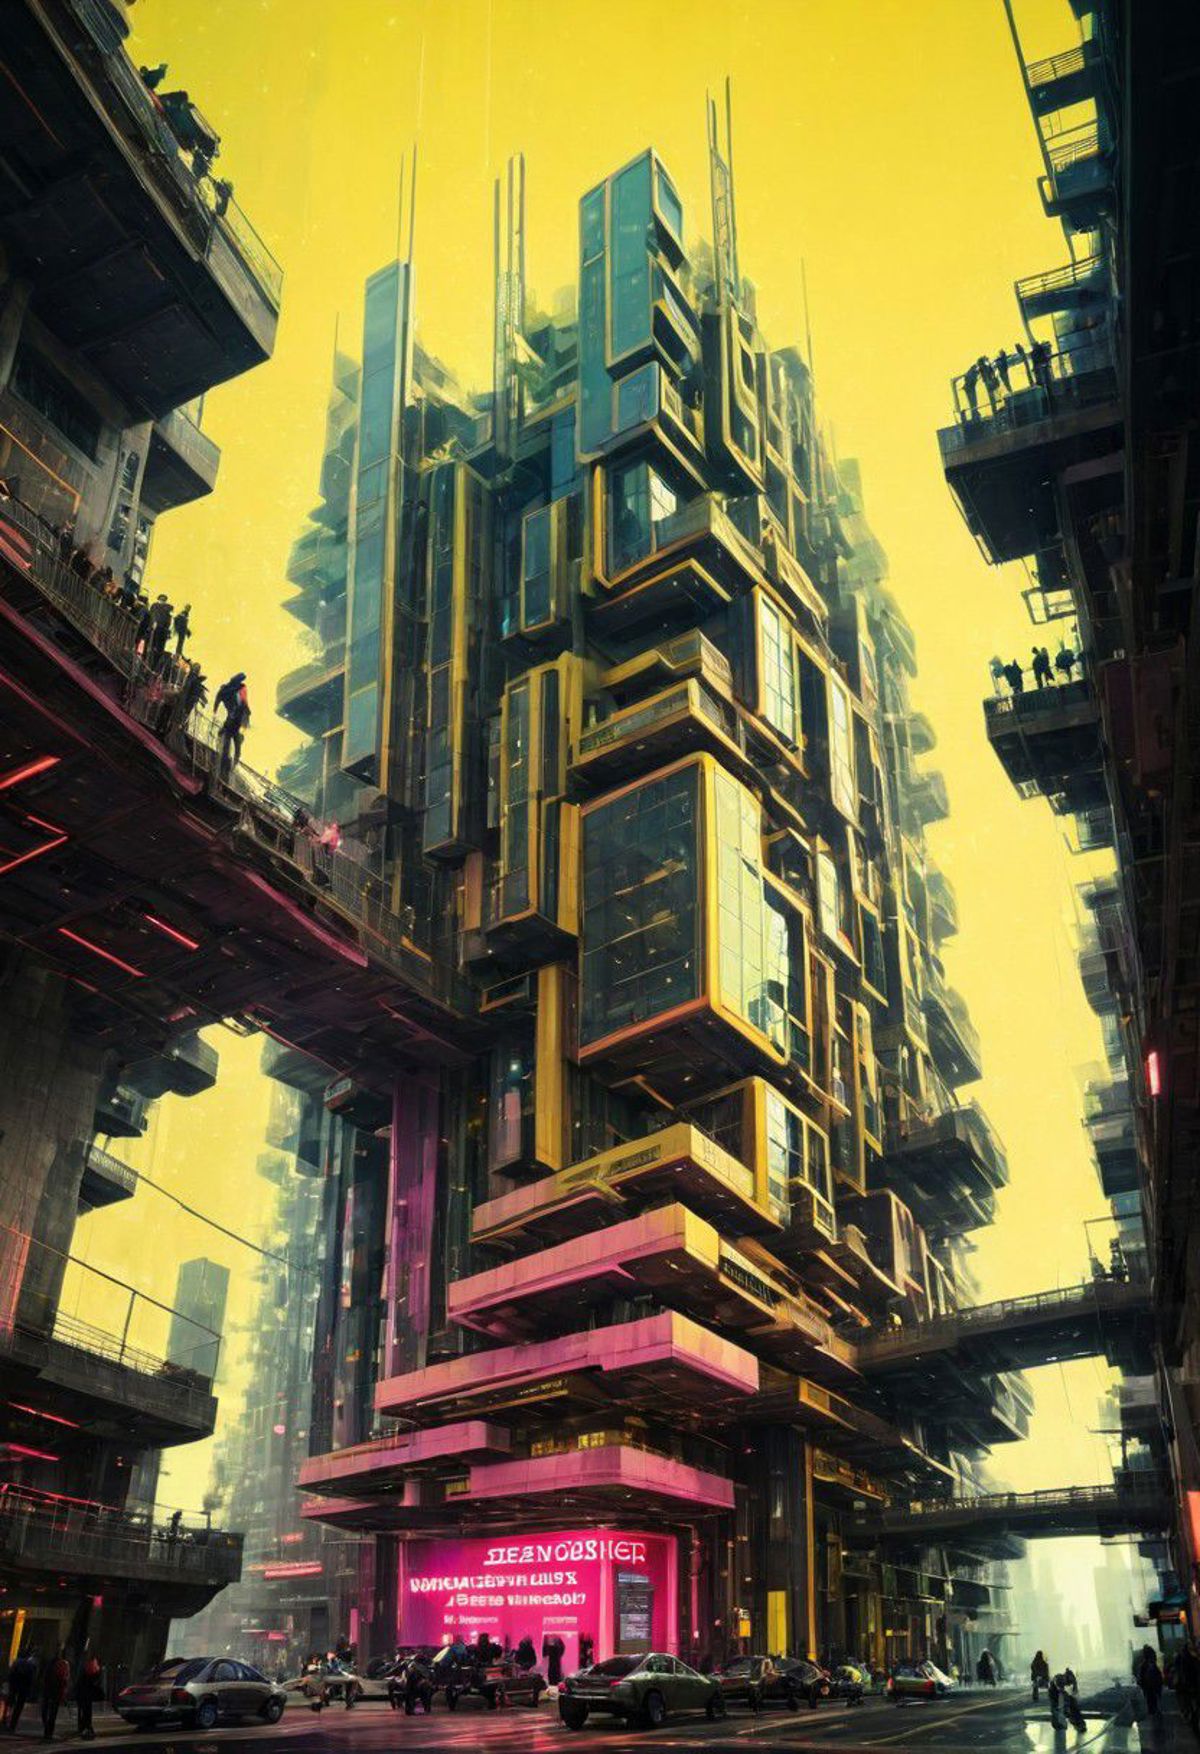 A large futuristic building with a yellow and purple color scheme.